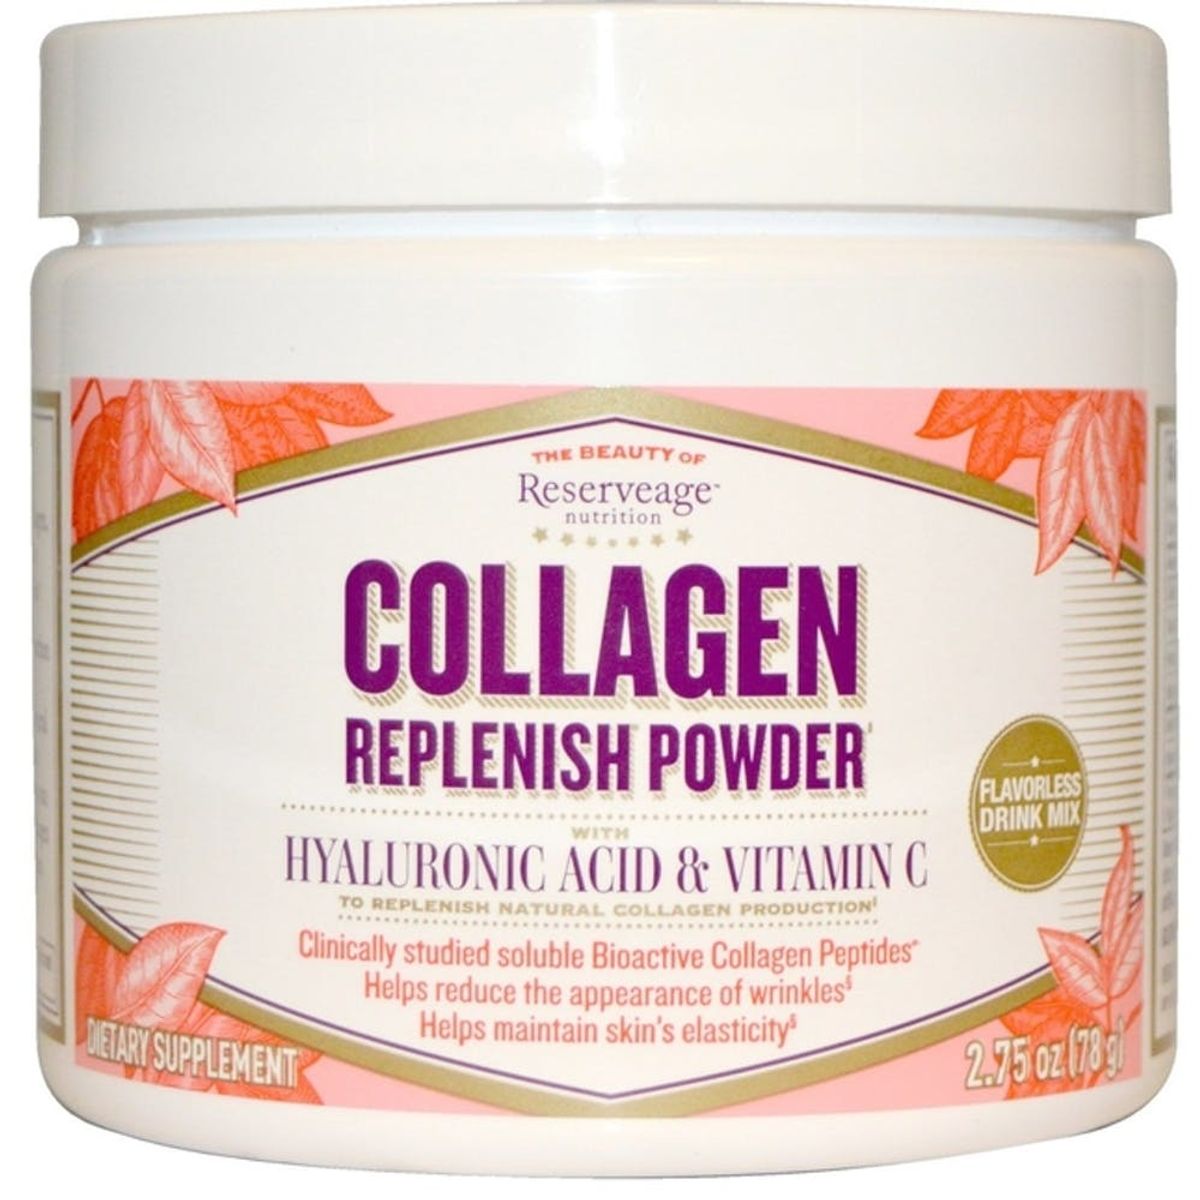 Why You Should Think Twice About Collagen Supplements